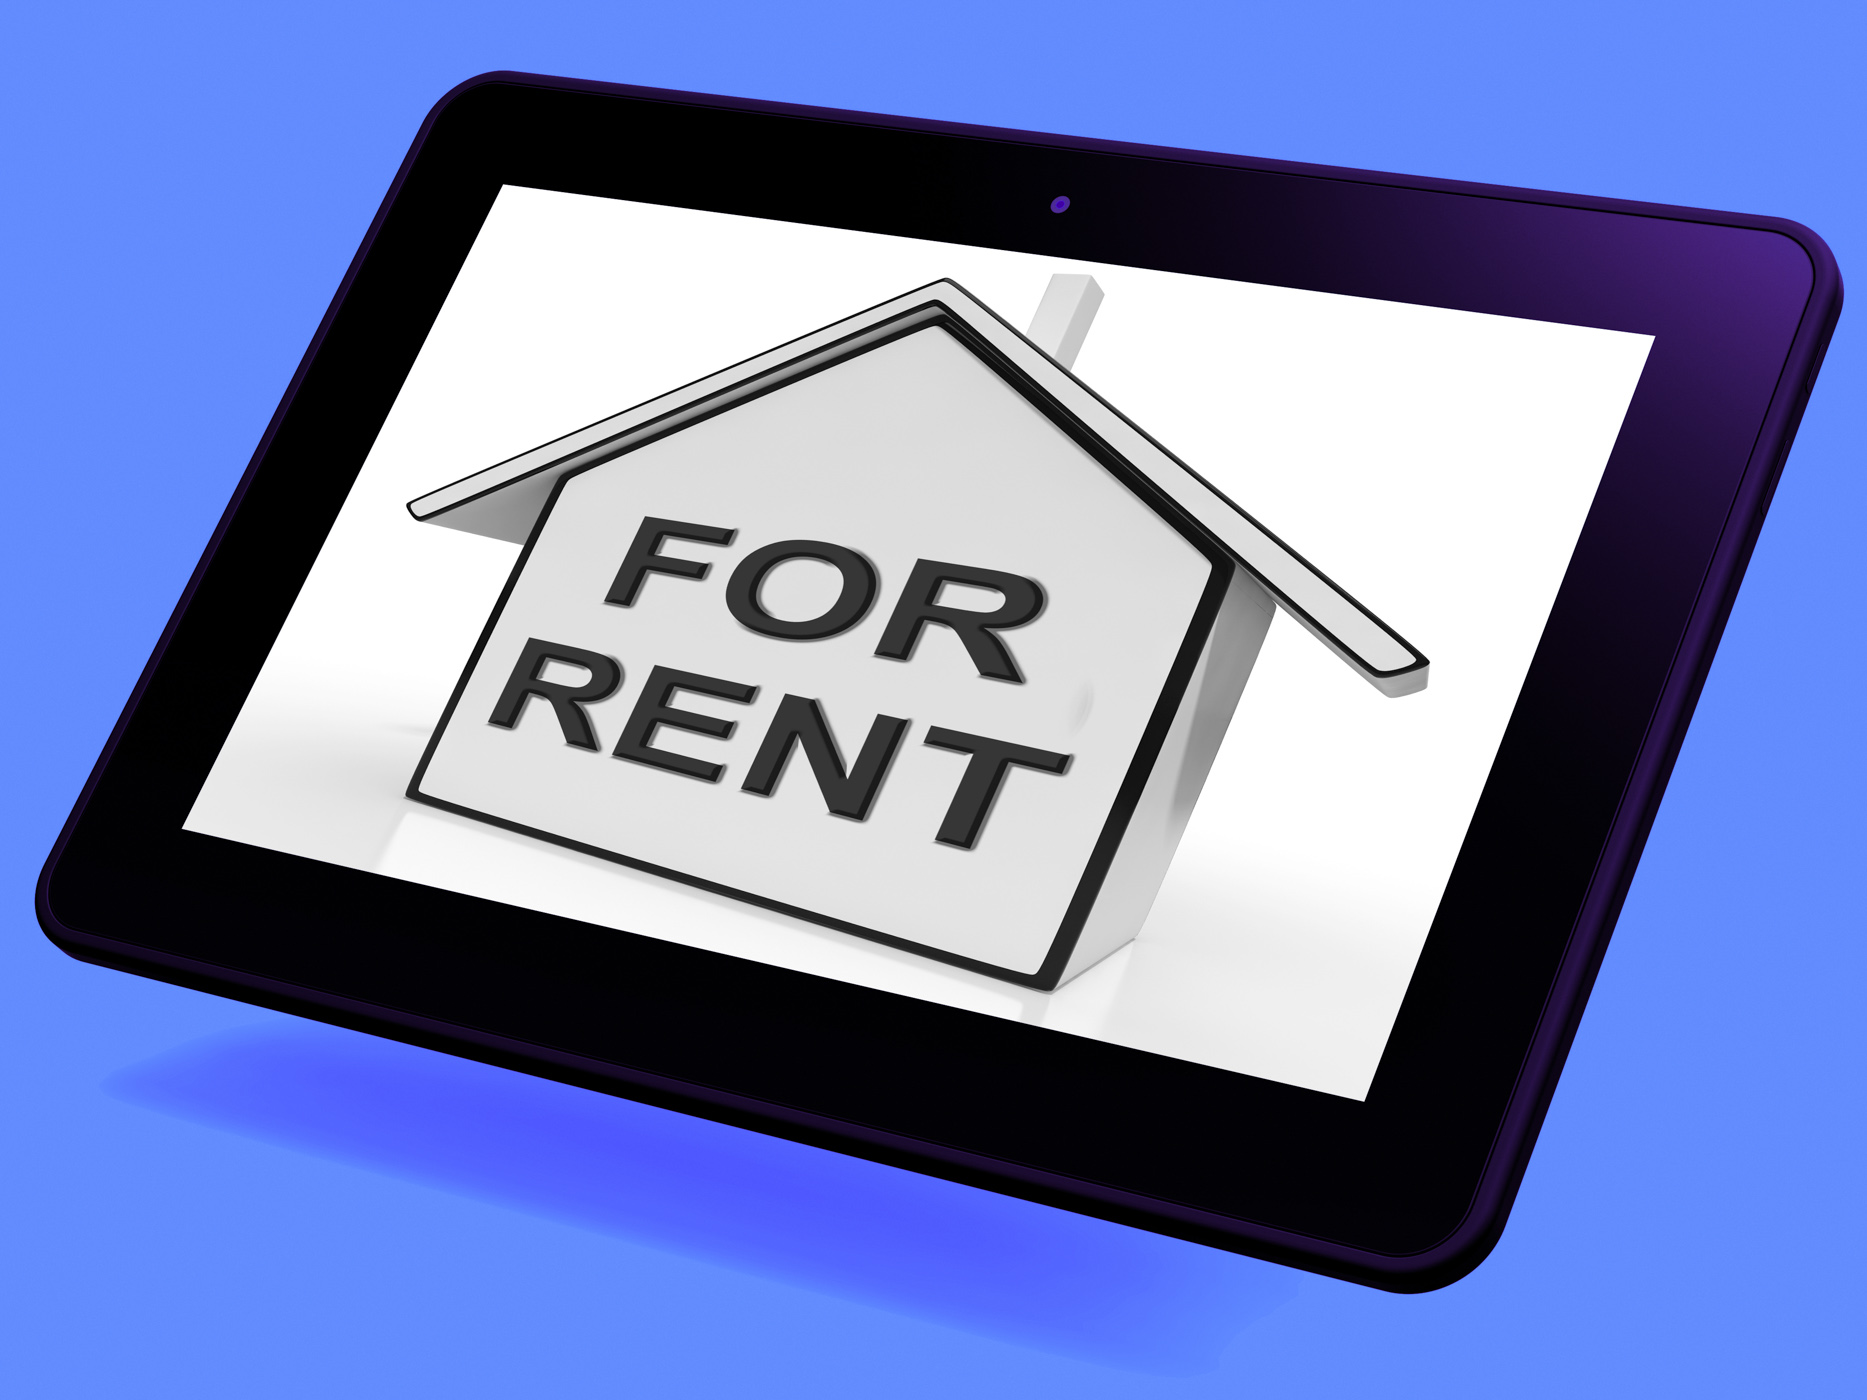 For Rent House Tablet Means Property Tenancy Or Lease, Propertymanager, Web, Unit, Tenants, HQ Photo